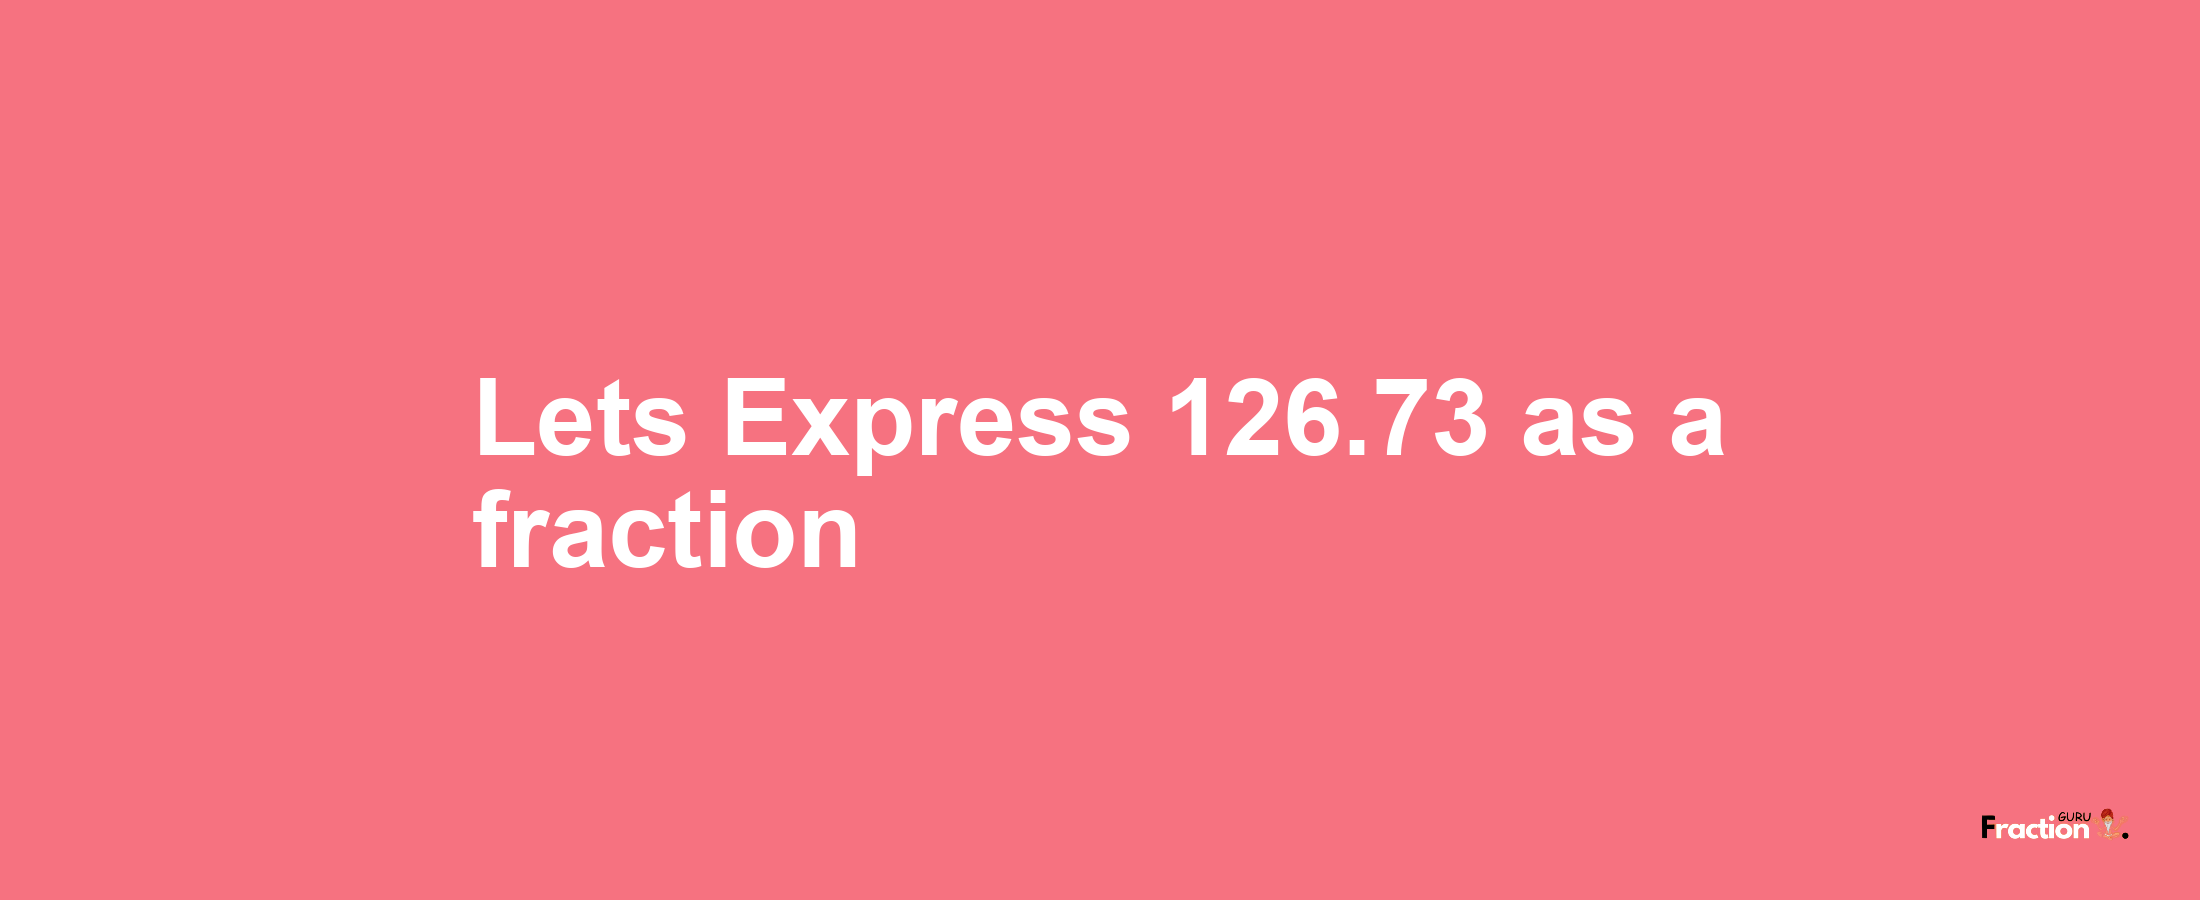 Lets Express 126.73 as afraction